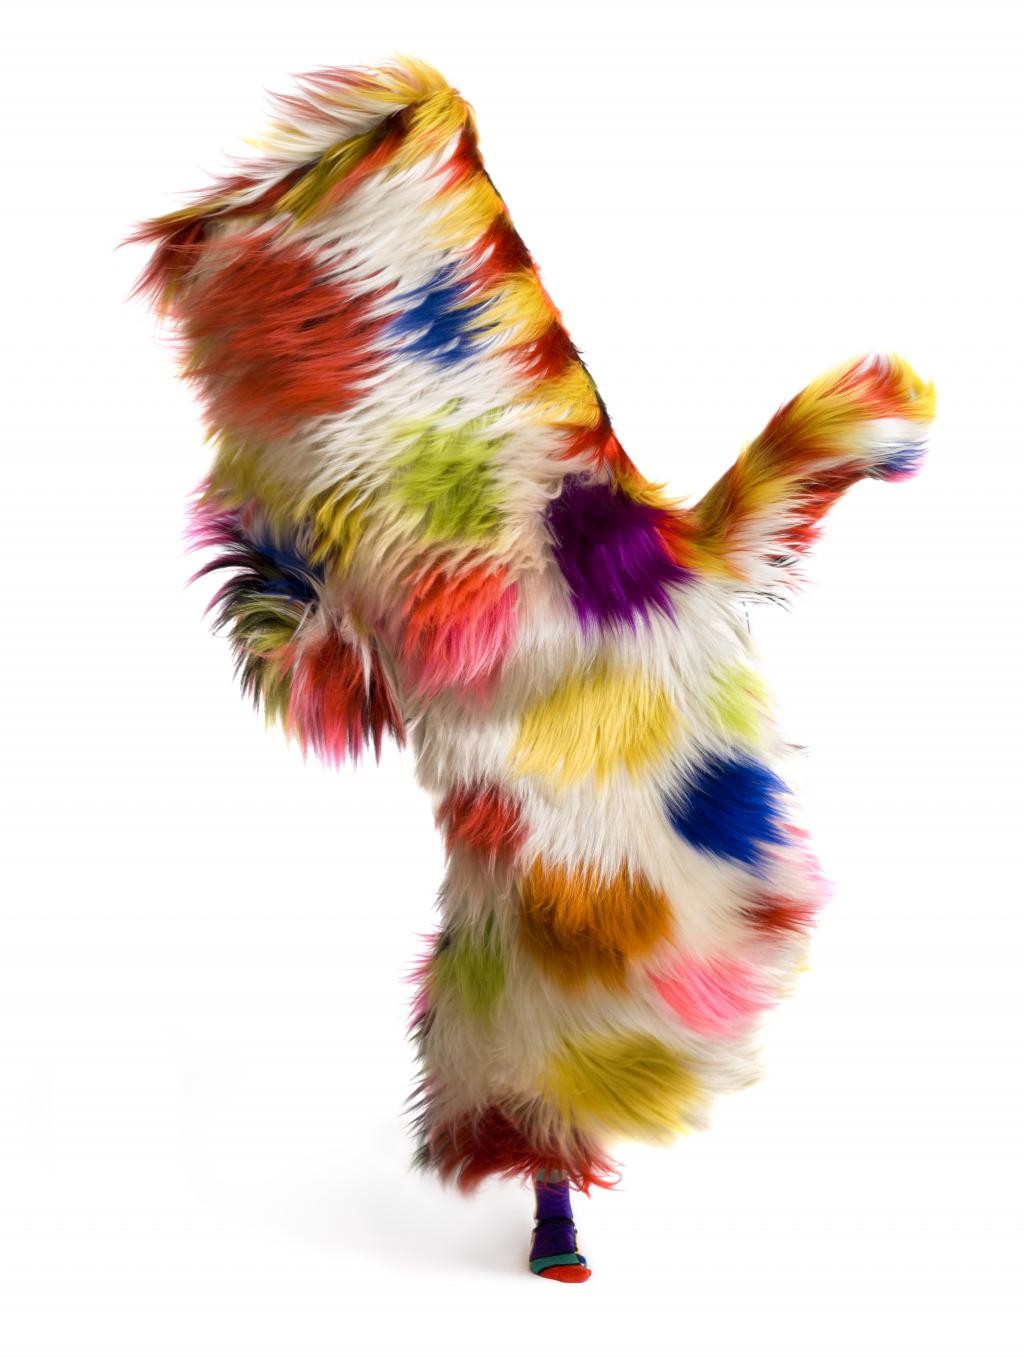 Nick Cave's Soundsuit #2 is availble on Artspace for $350